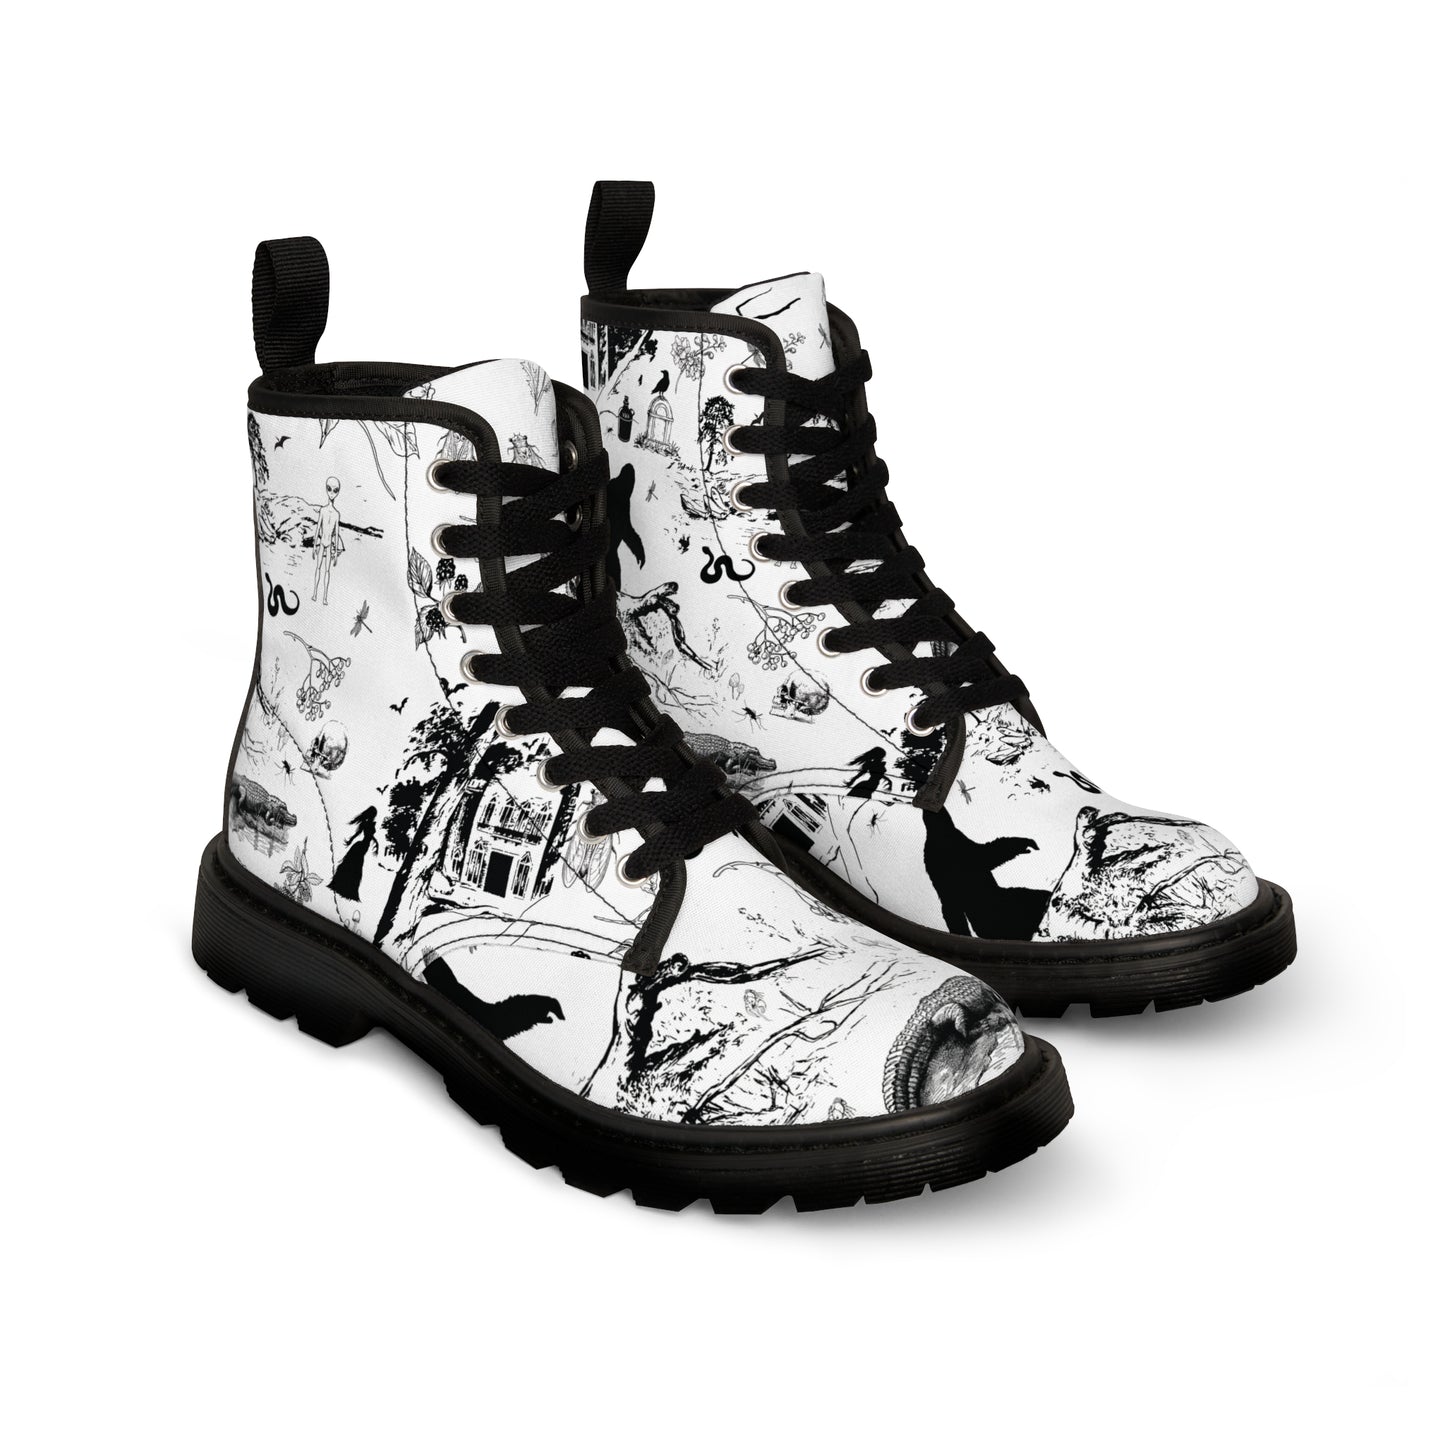 The Strange South Toile Women's Canvas Boots